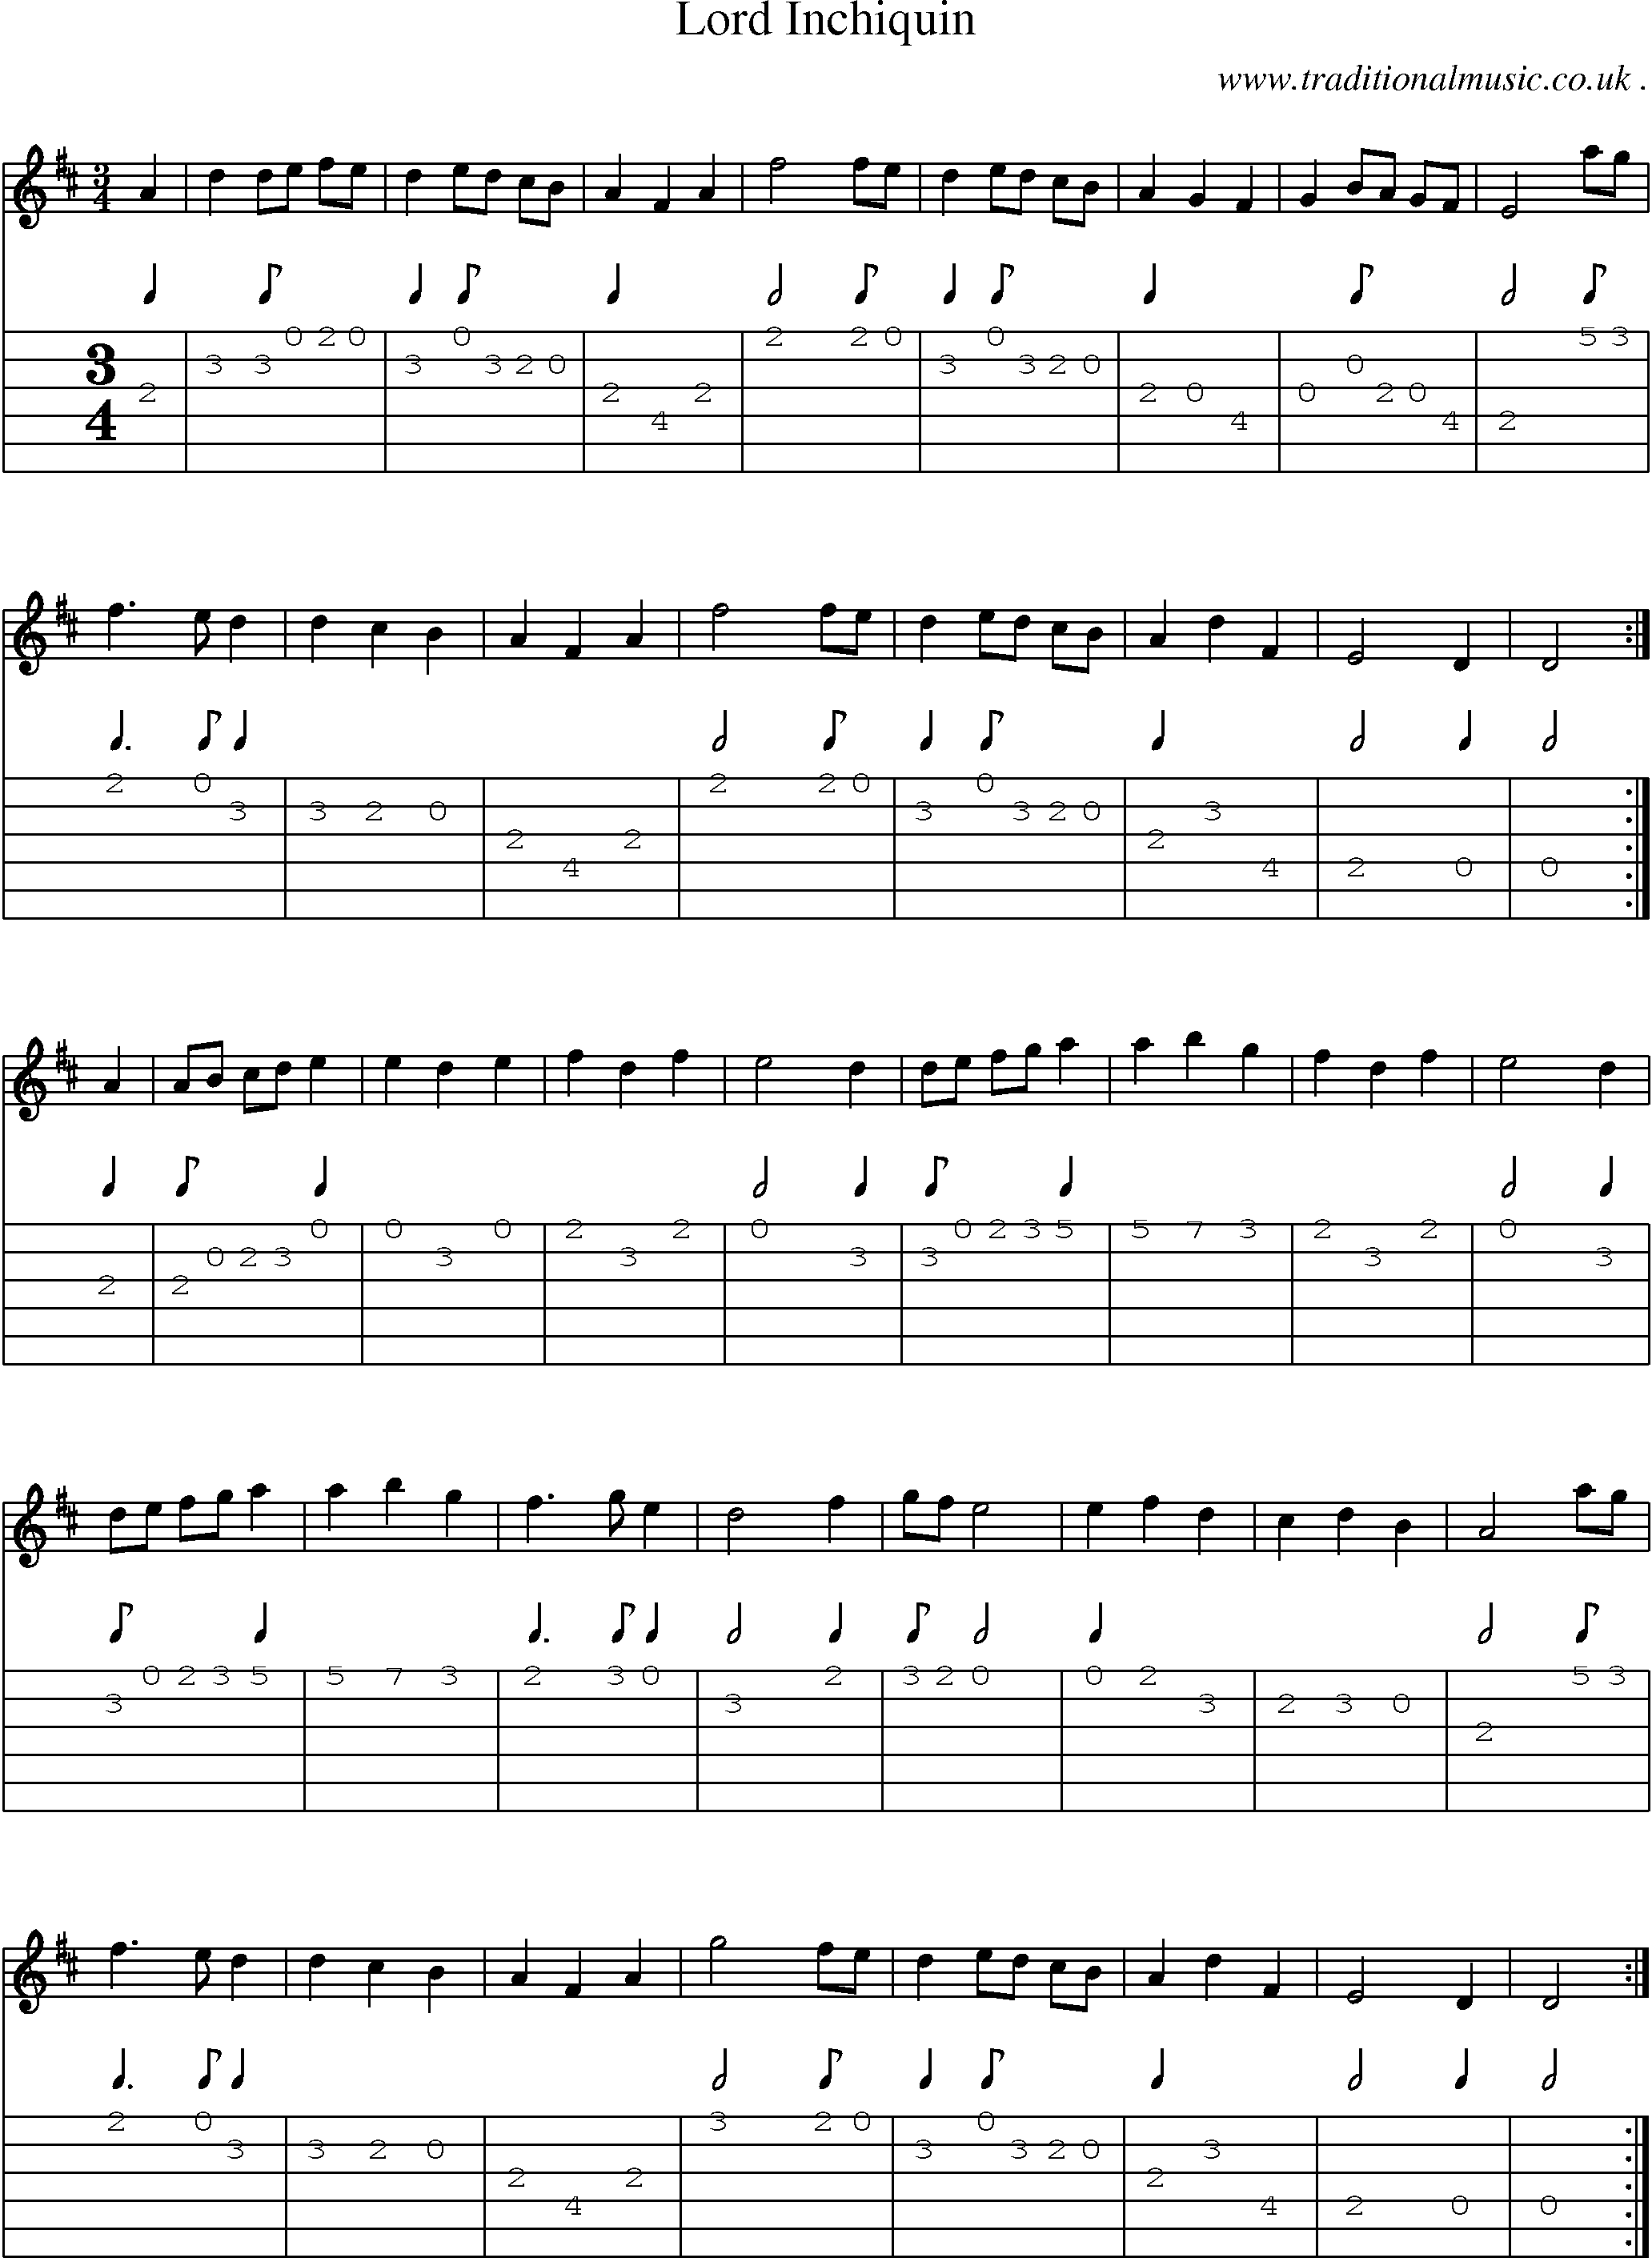 Sheet-Music and Guitar Tabs for Lord Inchiquin